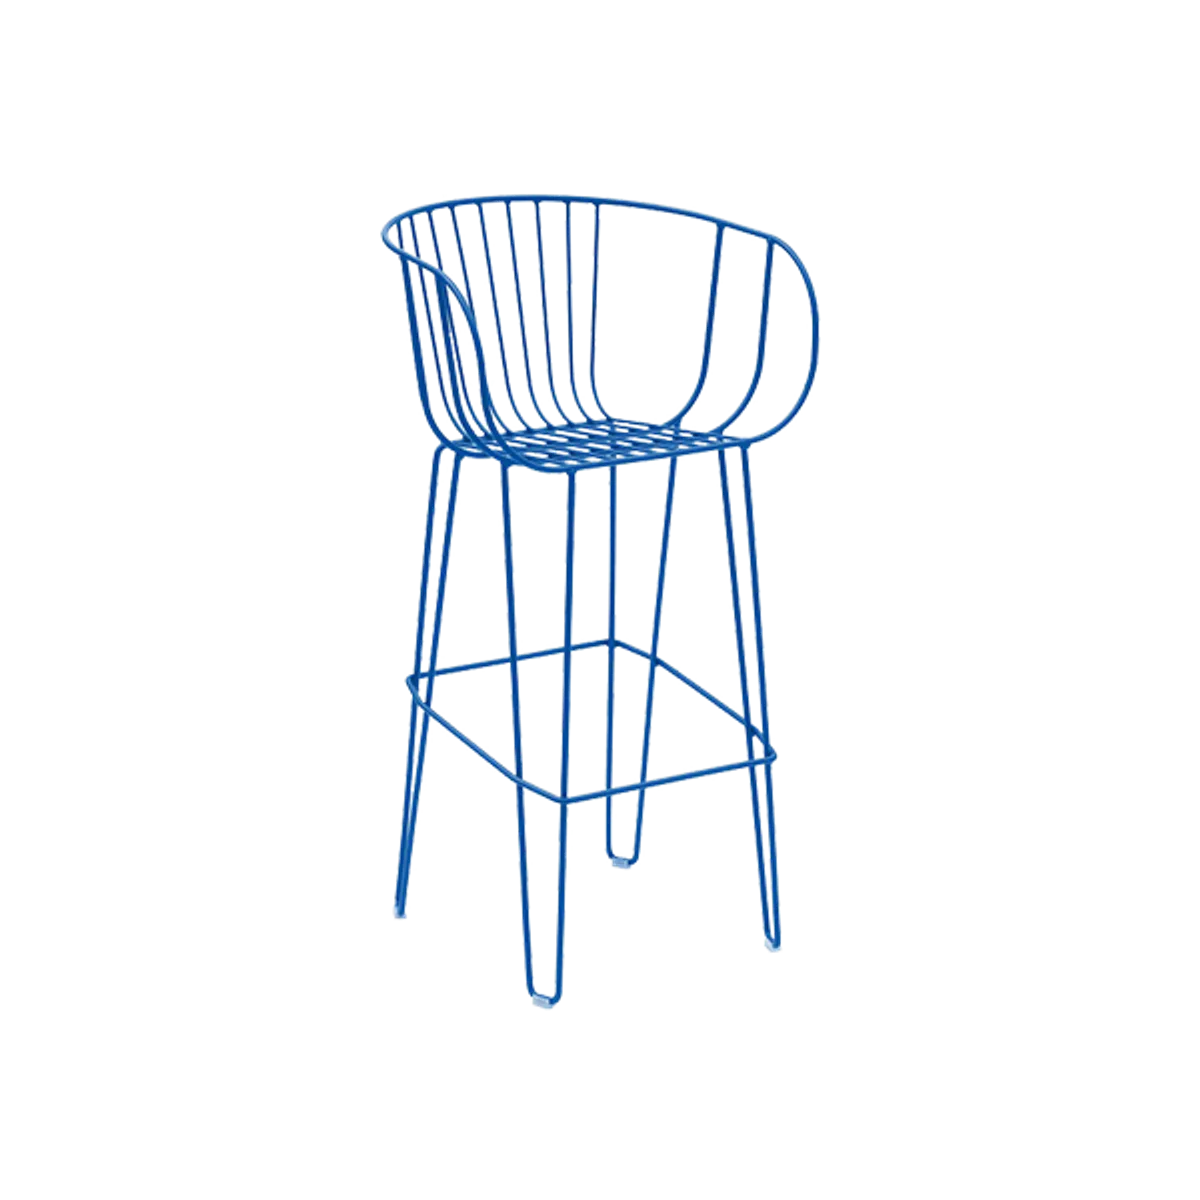 Web Cava Bar Height Bar Stool For Furnishing Outdoor Bars Poolside Restaurants In Blue Metal Frame Insideoutcontracts